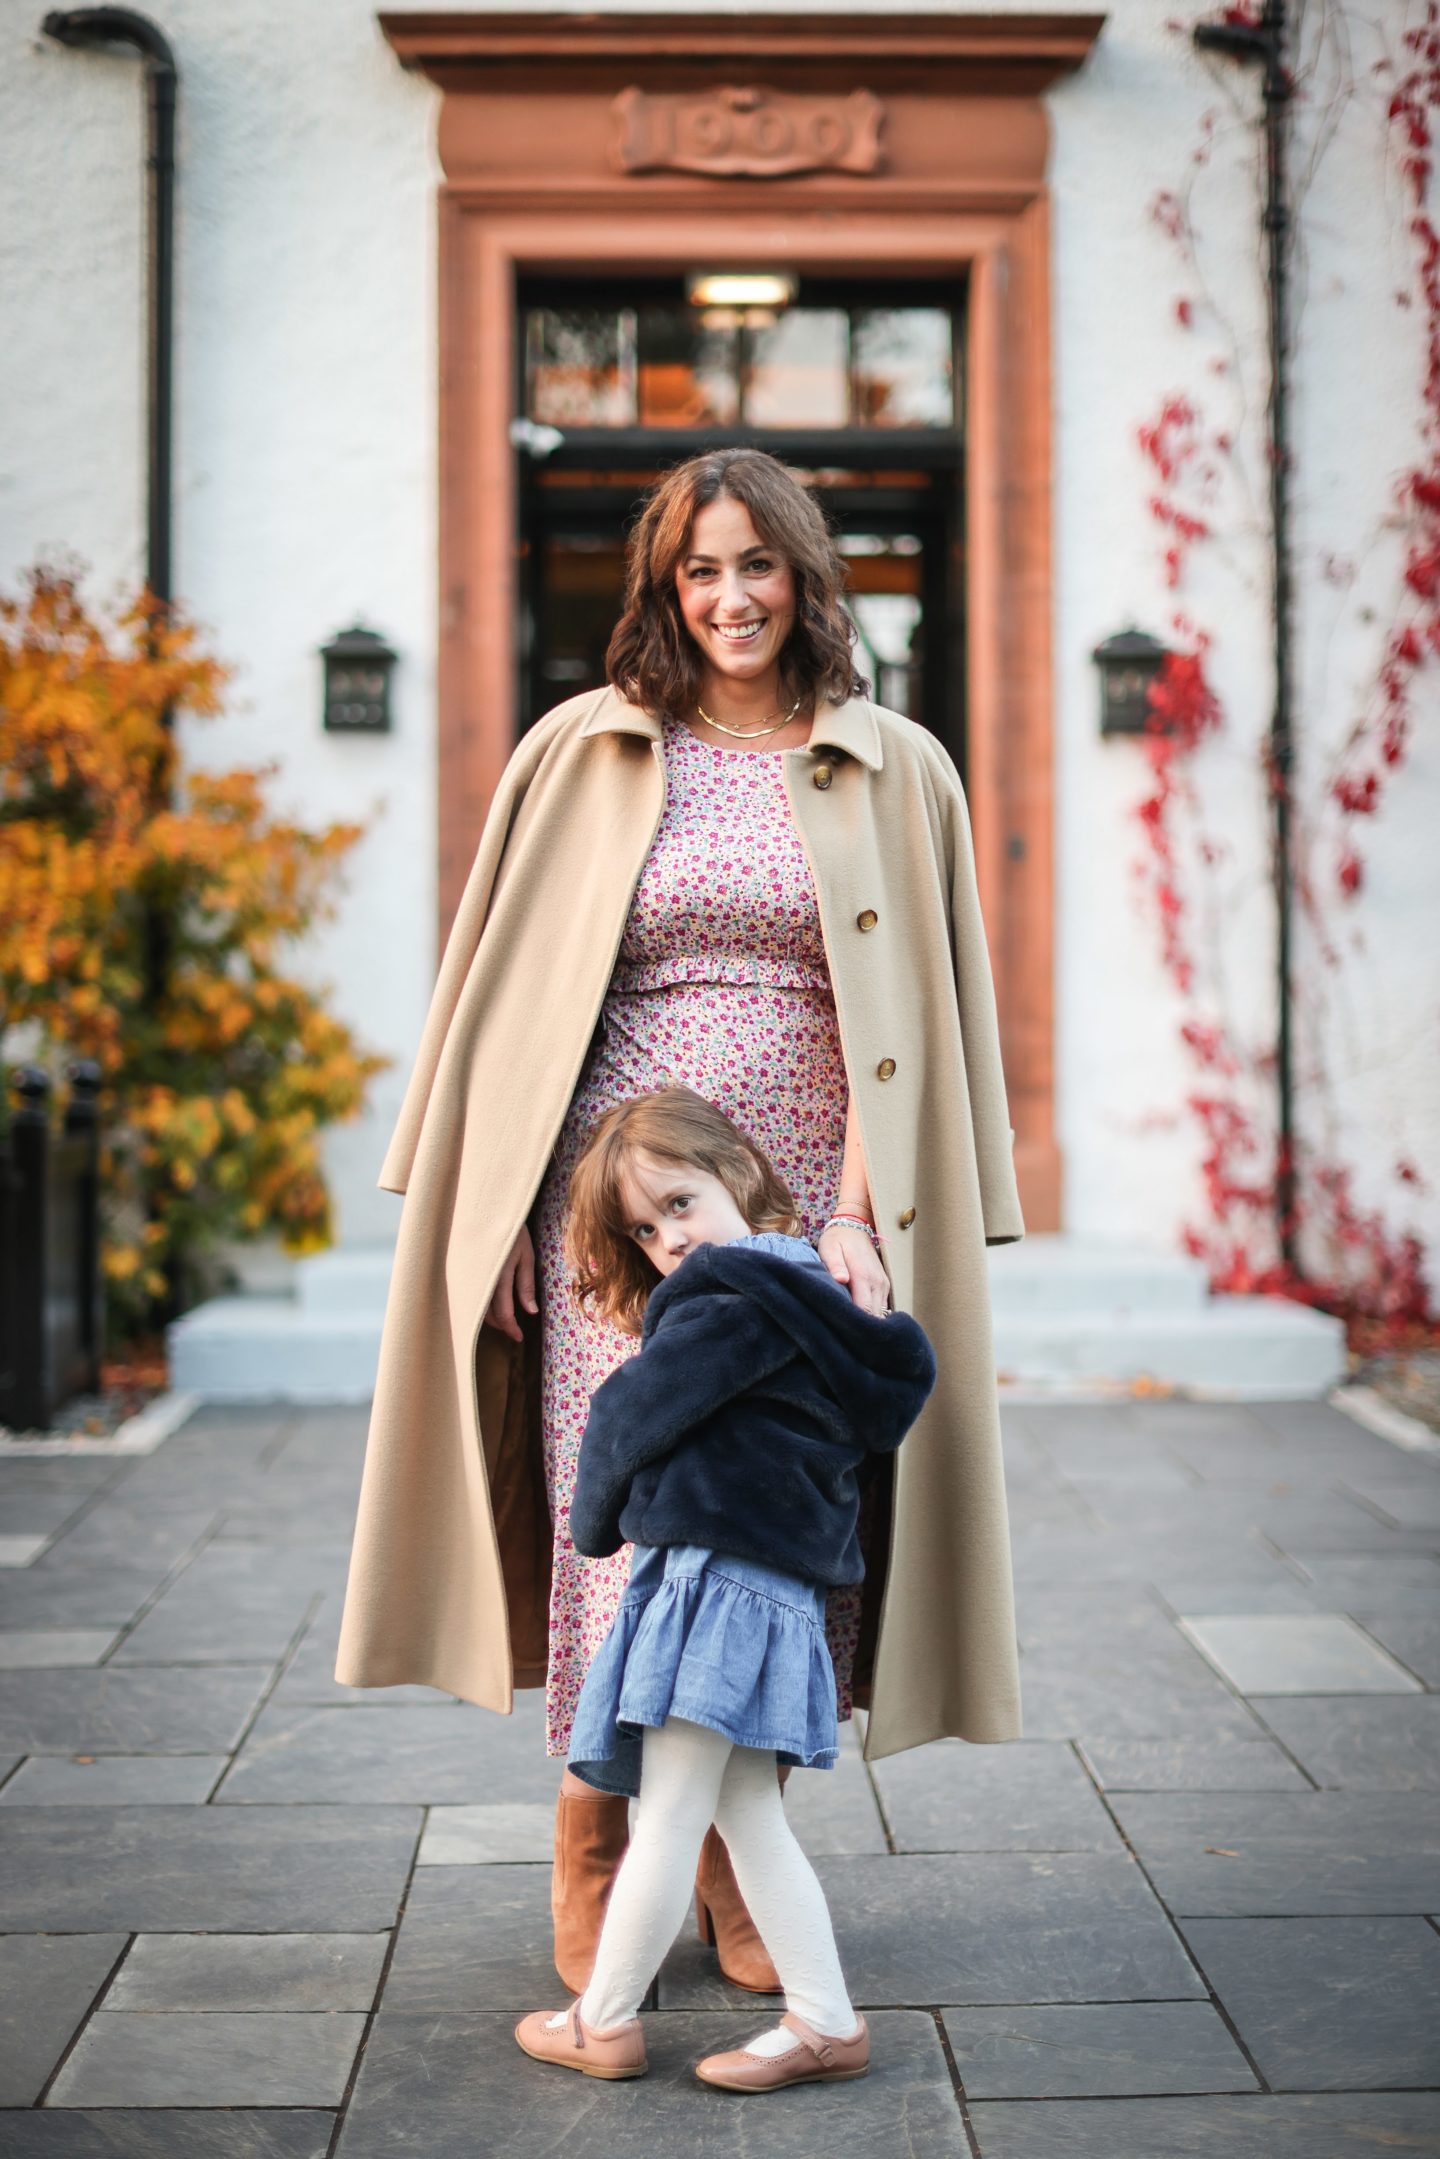 A woman and little girl standing together looking to camera in front of a hotel front door with autumn leaves in shot